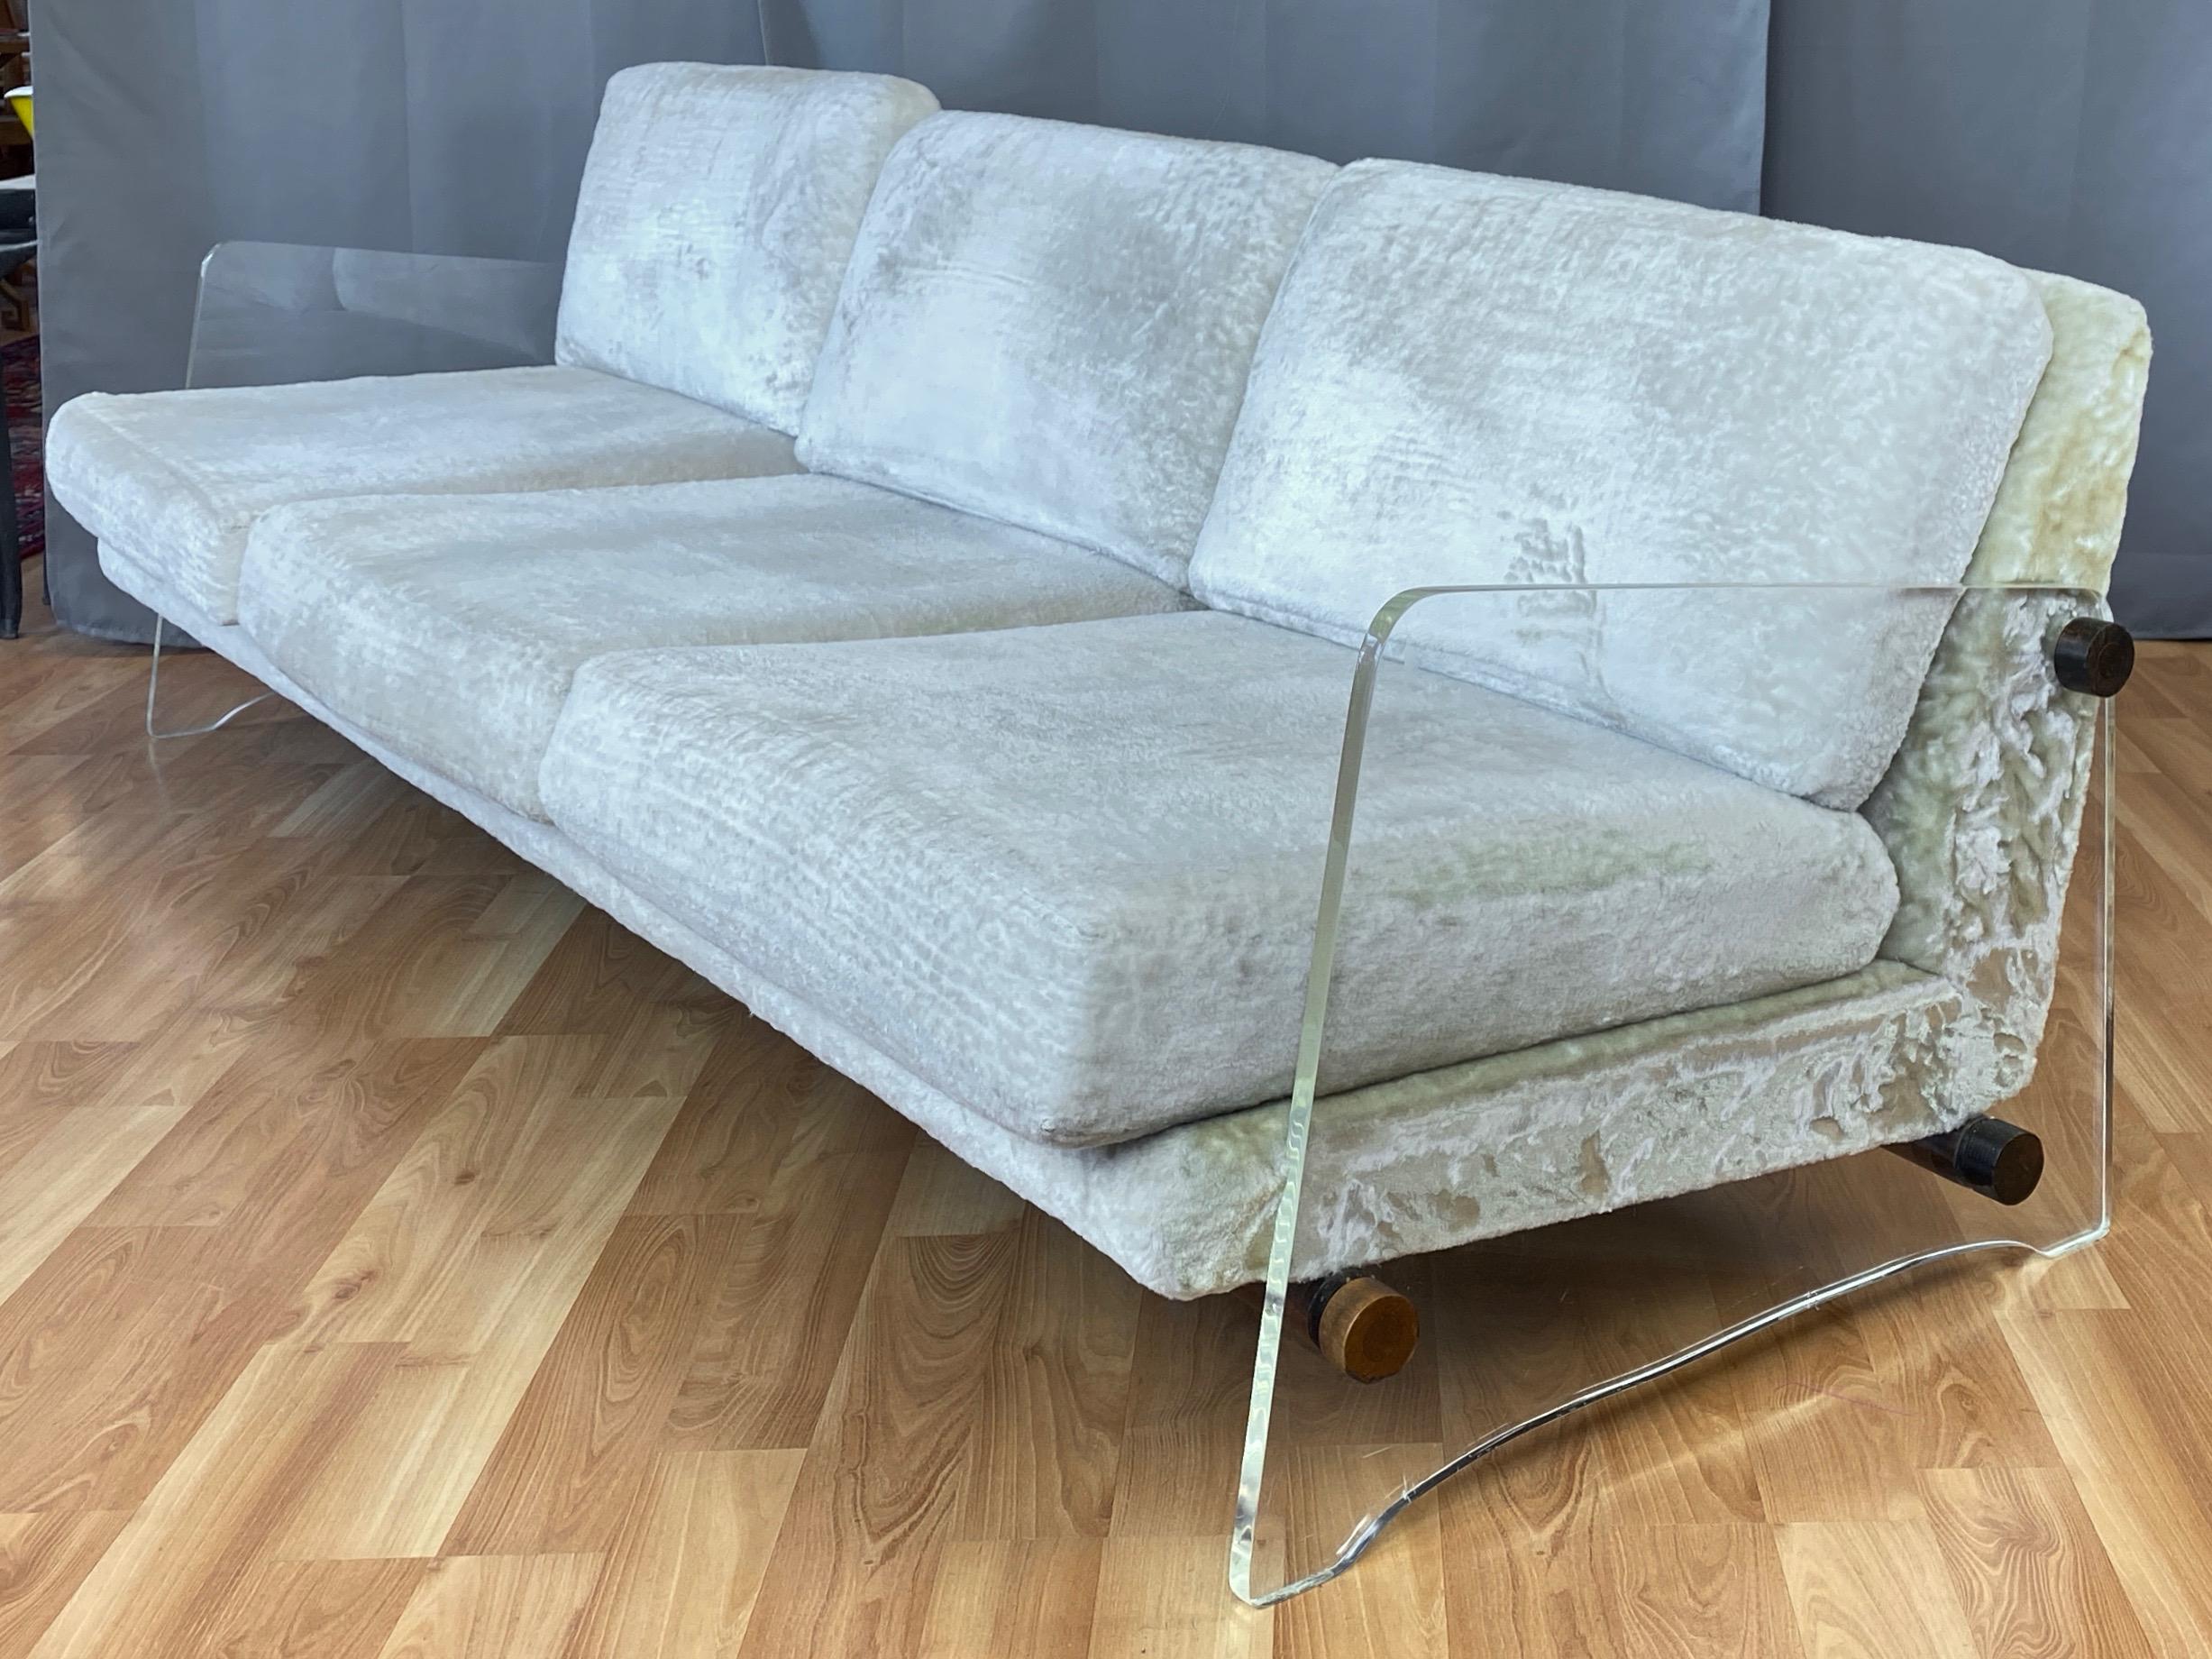 A rare extra-long late-1960s Monogram collection lucite-sided sofa designed by Norman Fox MacGregor exclusively for Sam Belz of Memphis.

Large .75”-thick lucite slabs have a clean yet commanding profile, and are connected by walnut rods that appear